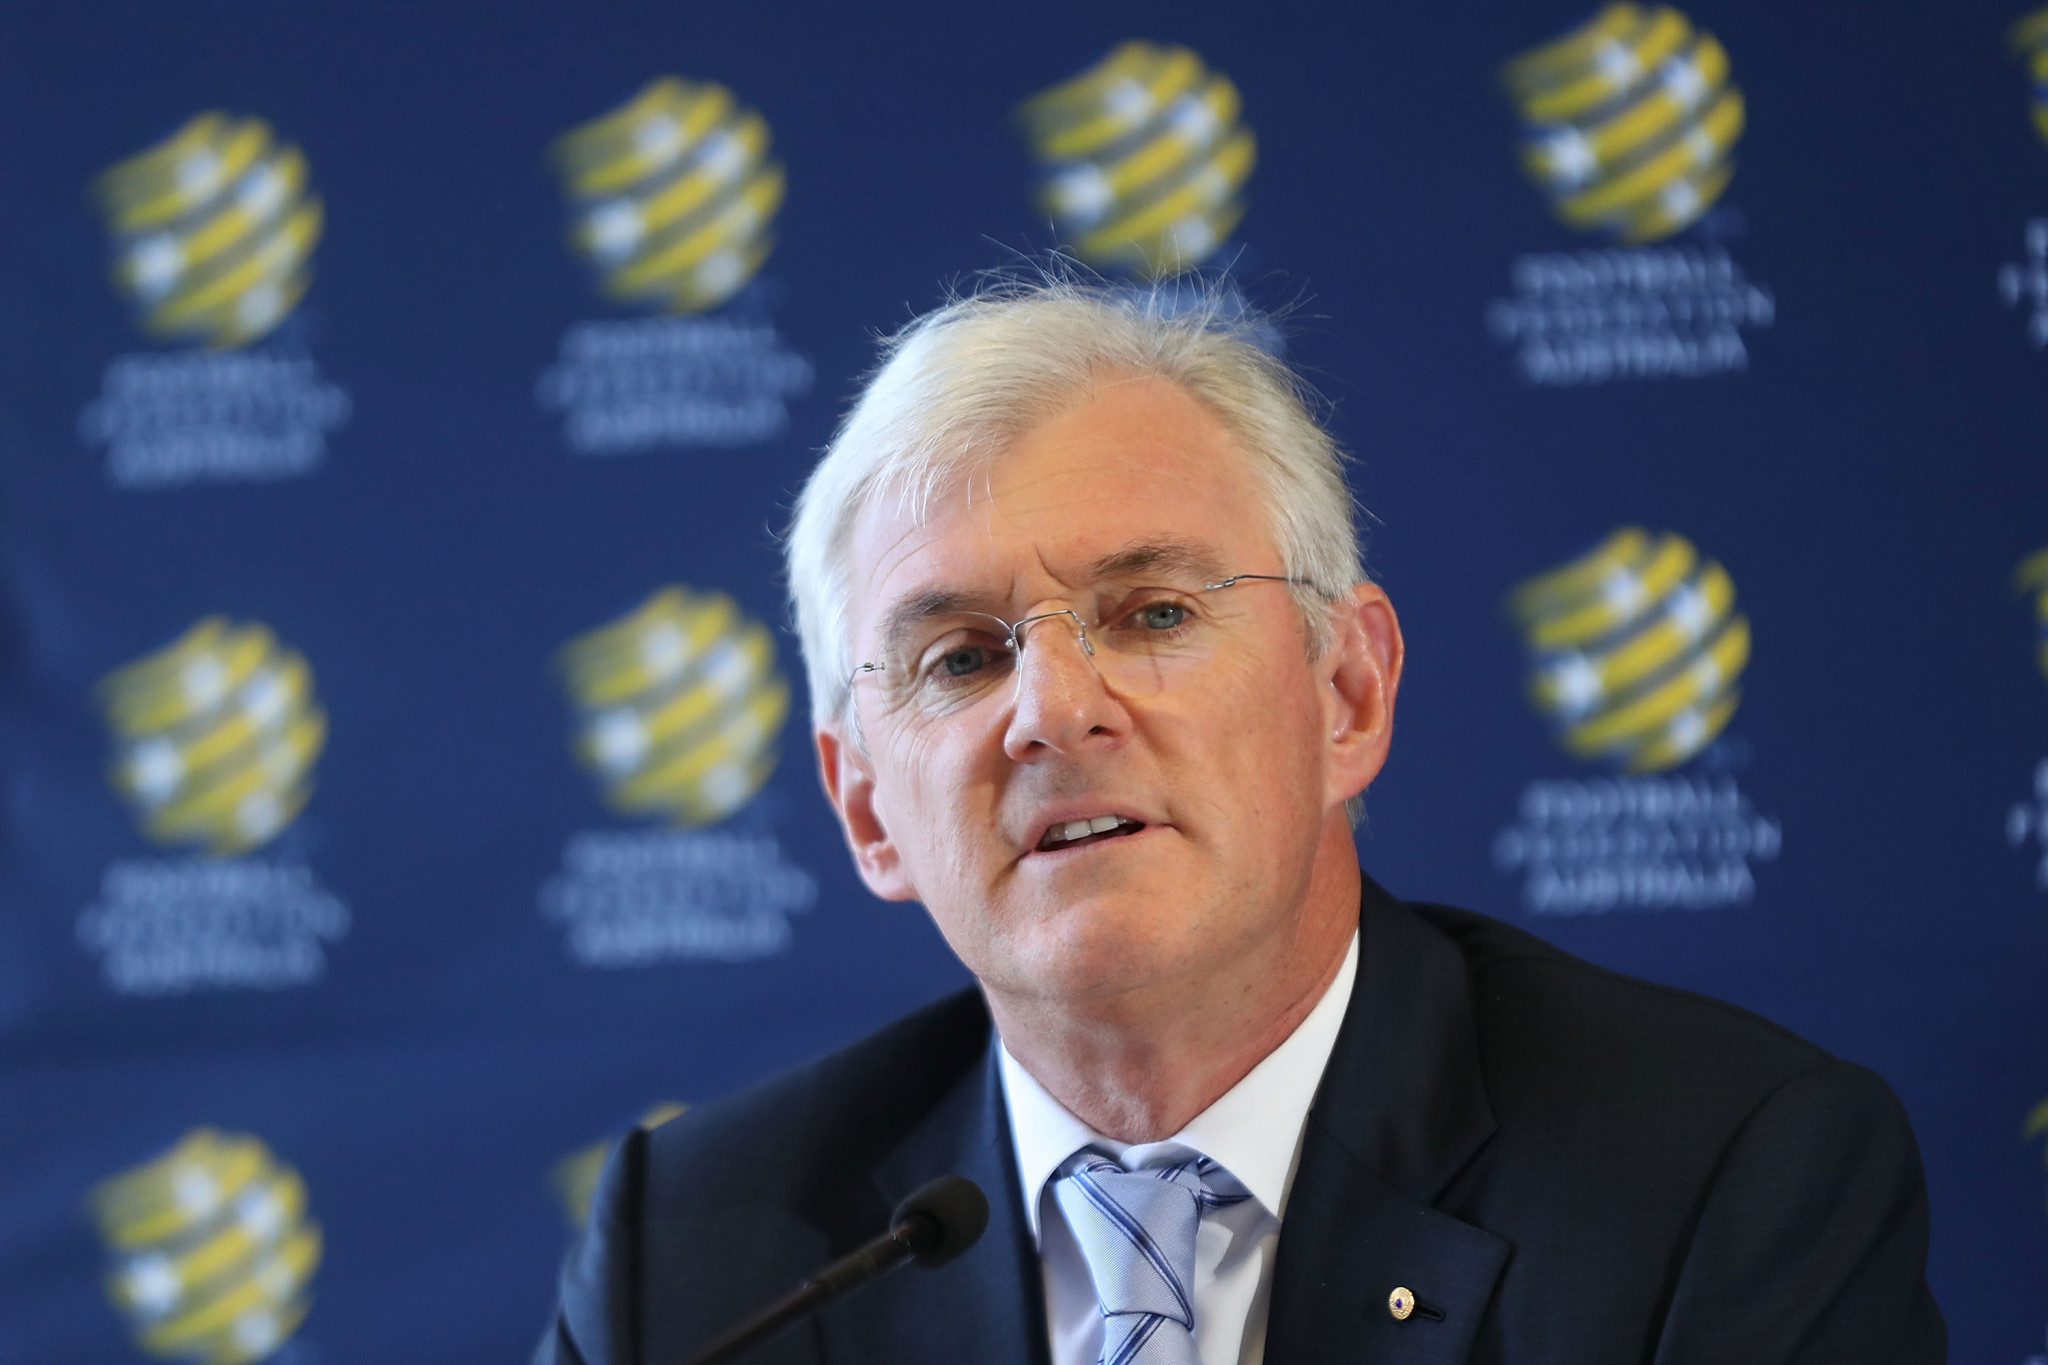 Football Federation Australia chairman Steven Lowy has decided to quit, amid a dispute over how the governing body is run ©Getty Images